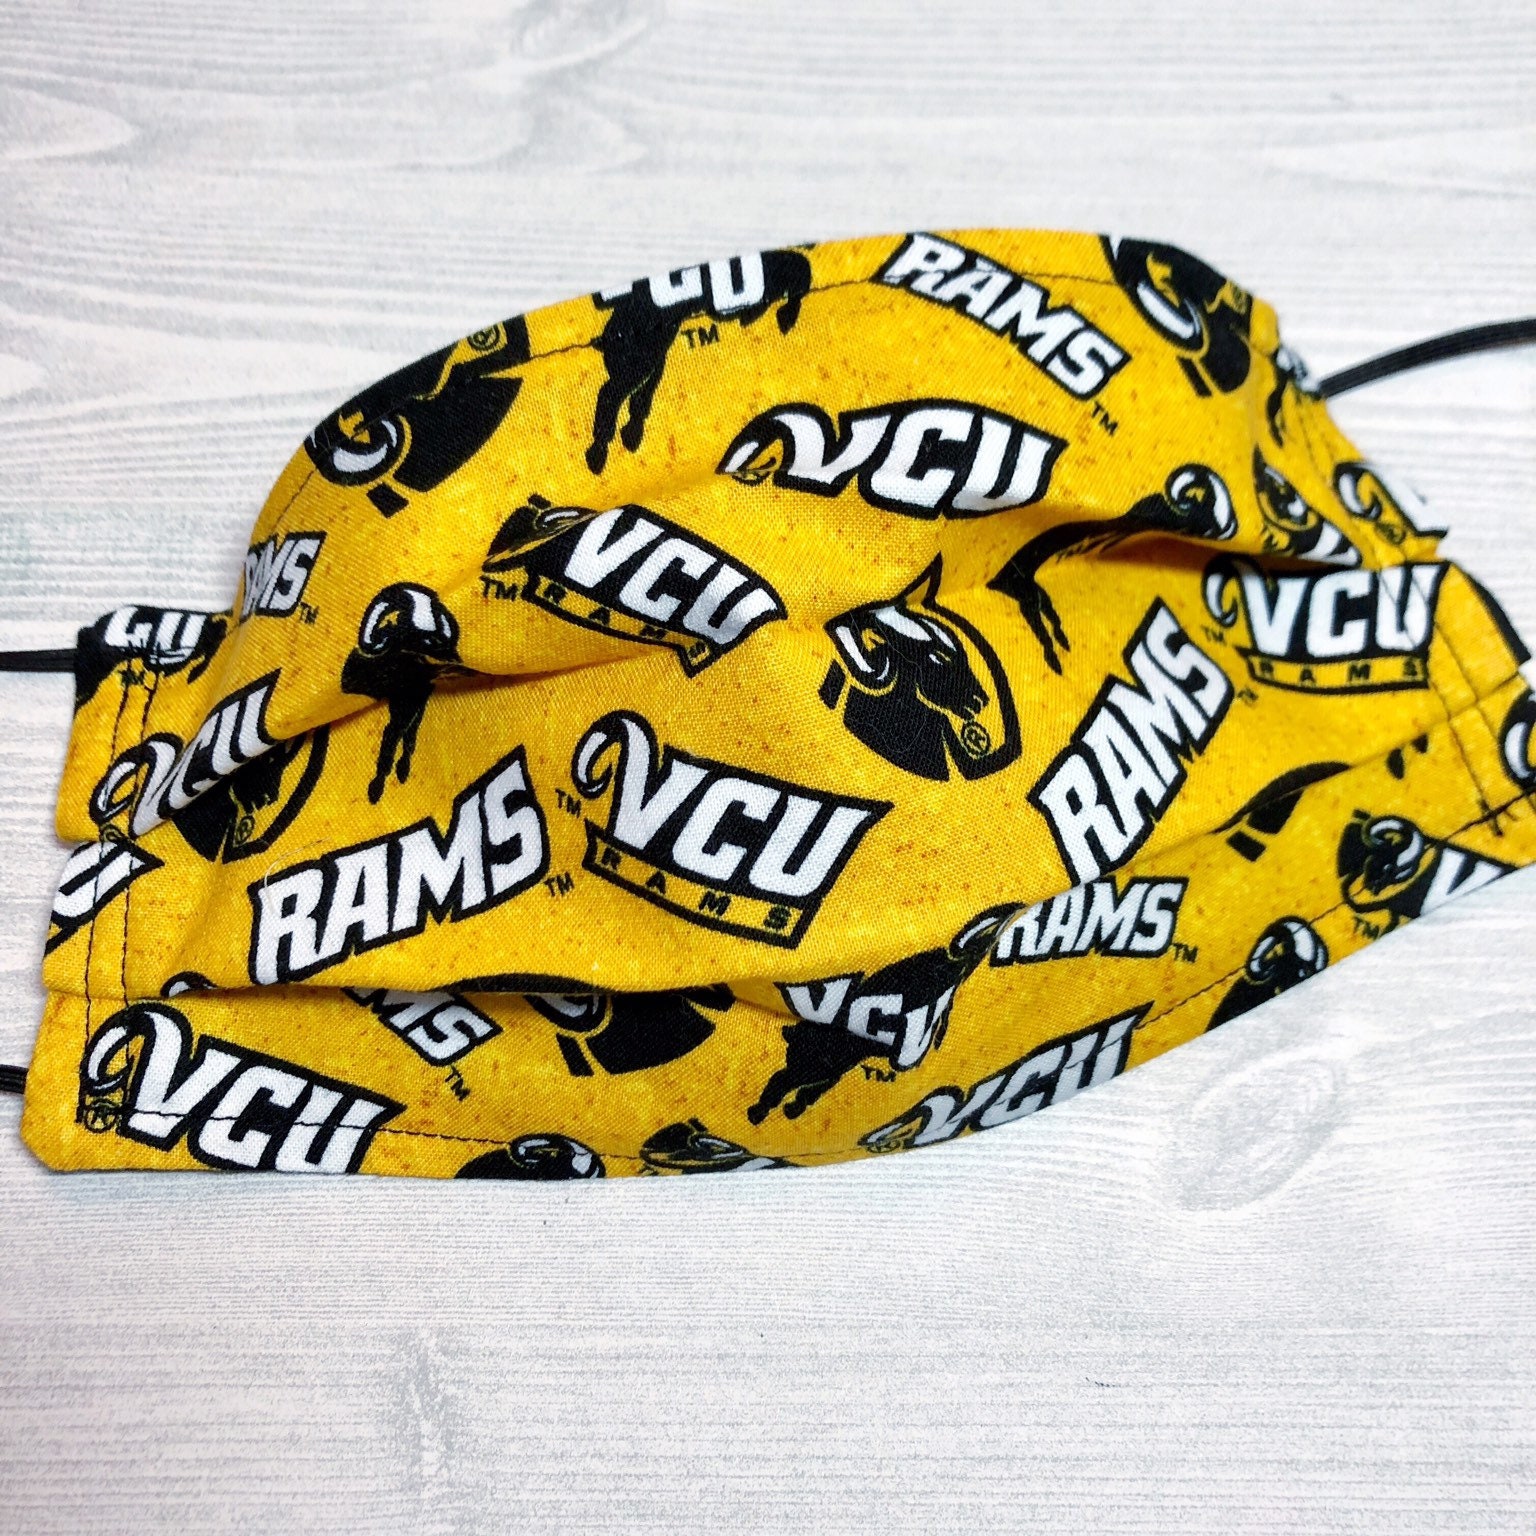 Vcu Rams Mask - Choose 2 Or 3 Layers - Optional Nose Wire - Adjustable Ear Straps - Virginia Commonwealth University Face Pleated Mask